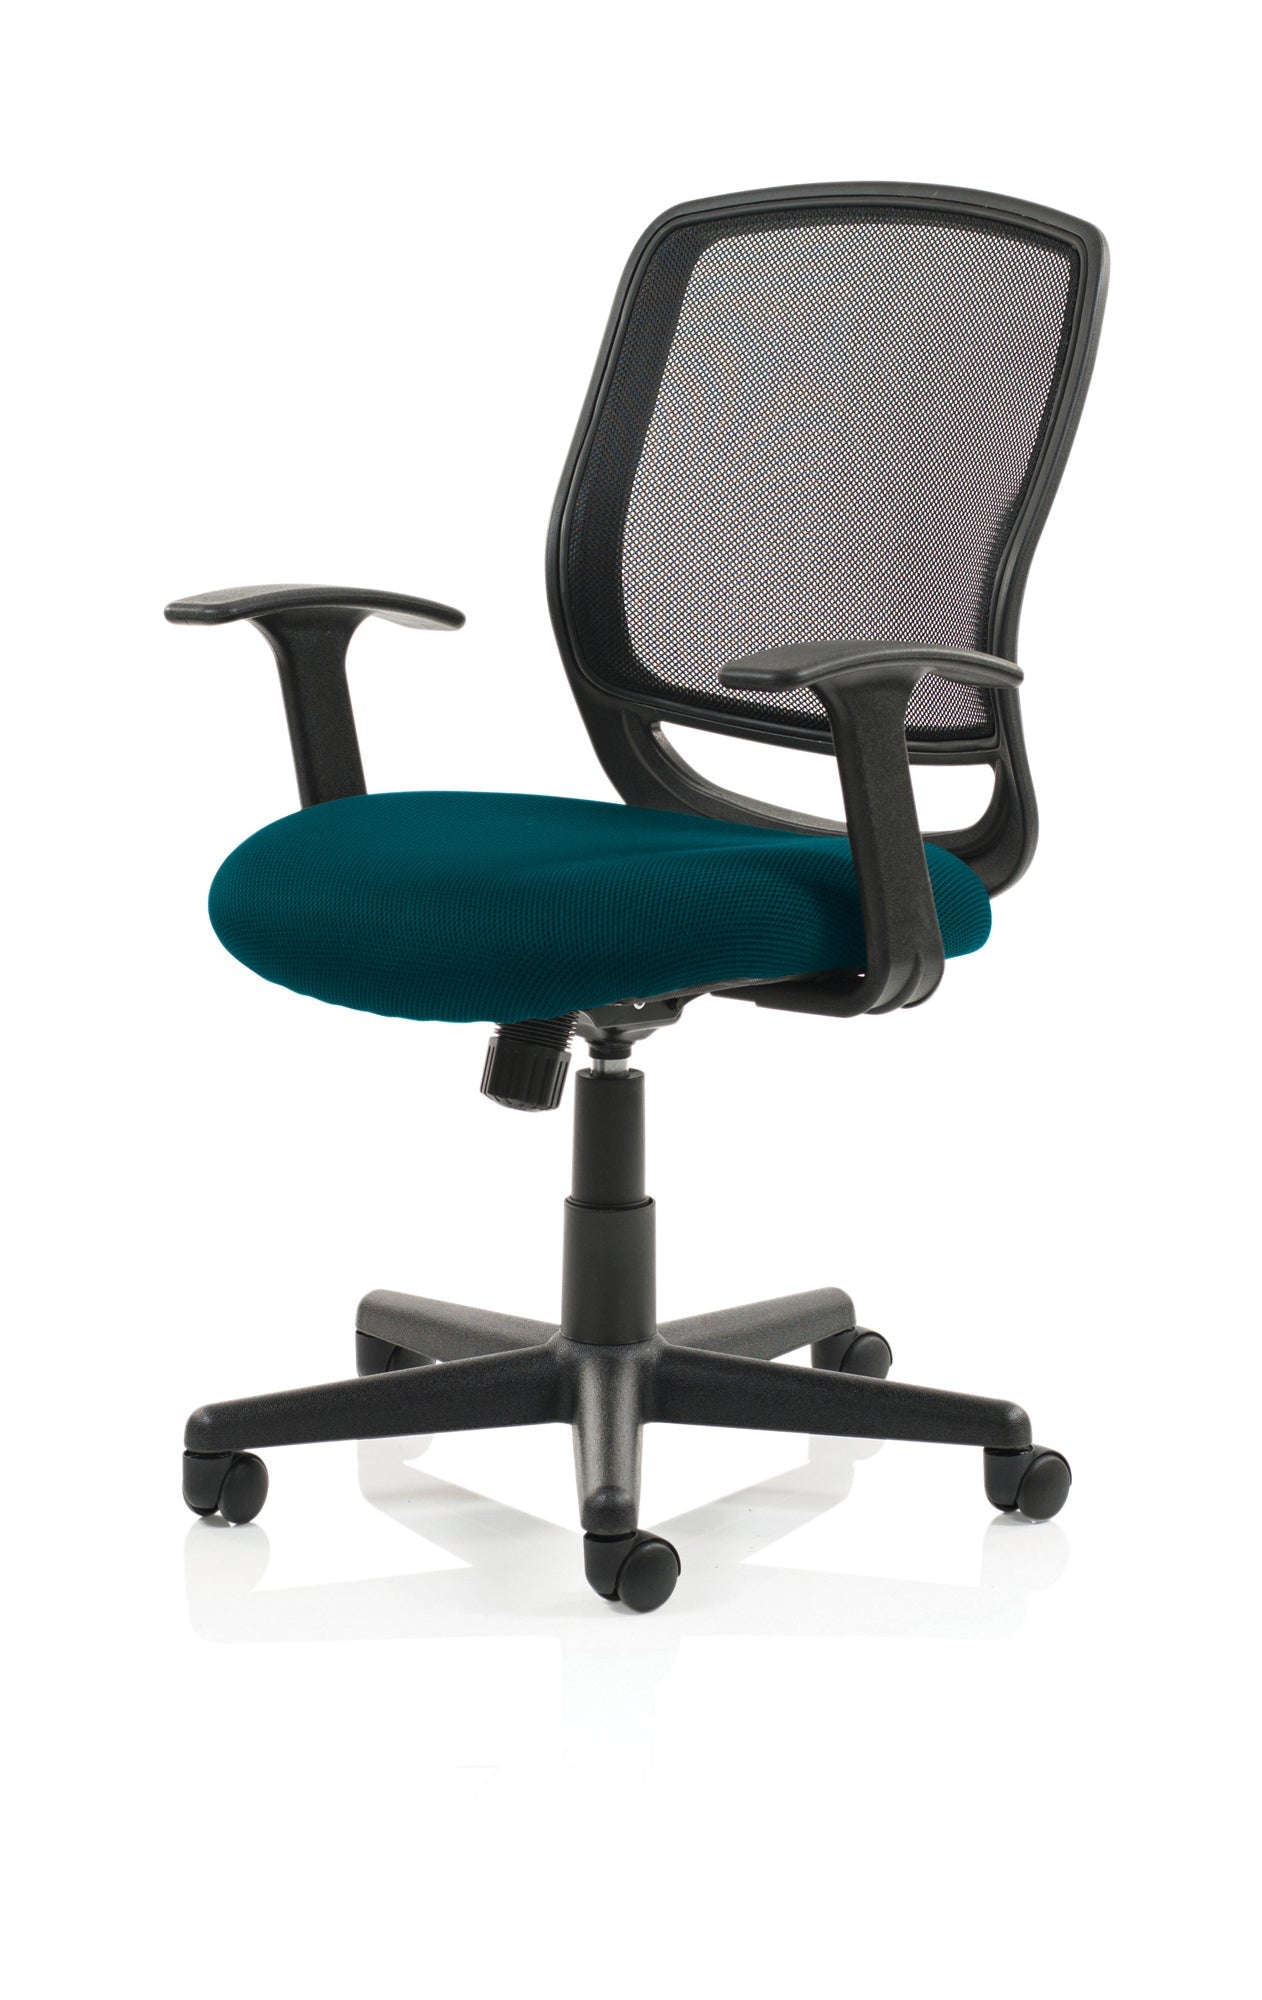 Mave Home Office Chair | Operator Chair | Home Office Furniture | Swivel Chair | Mesh Office Chair